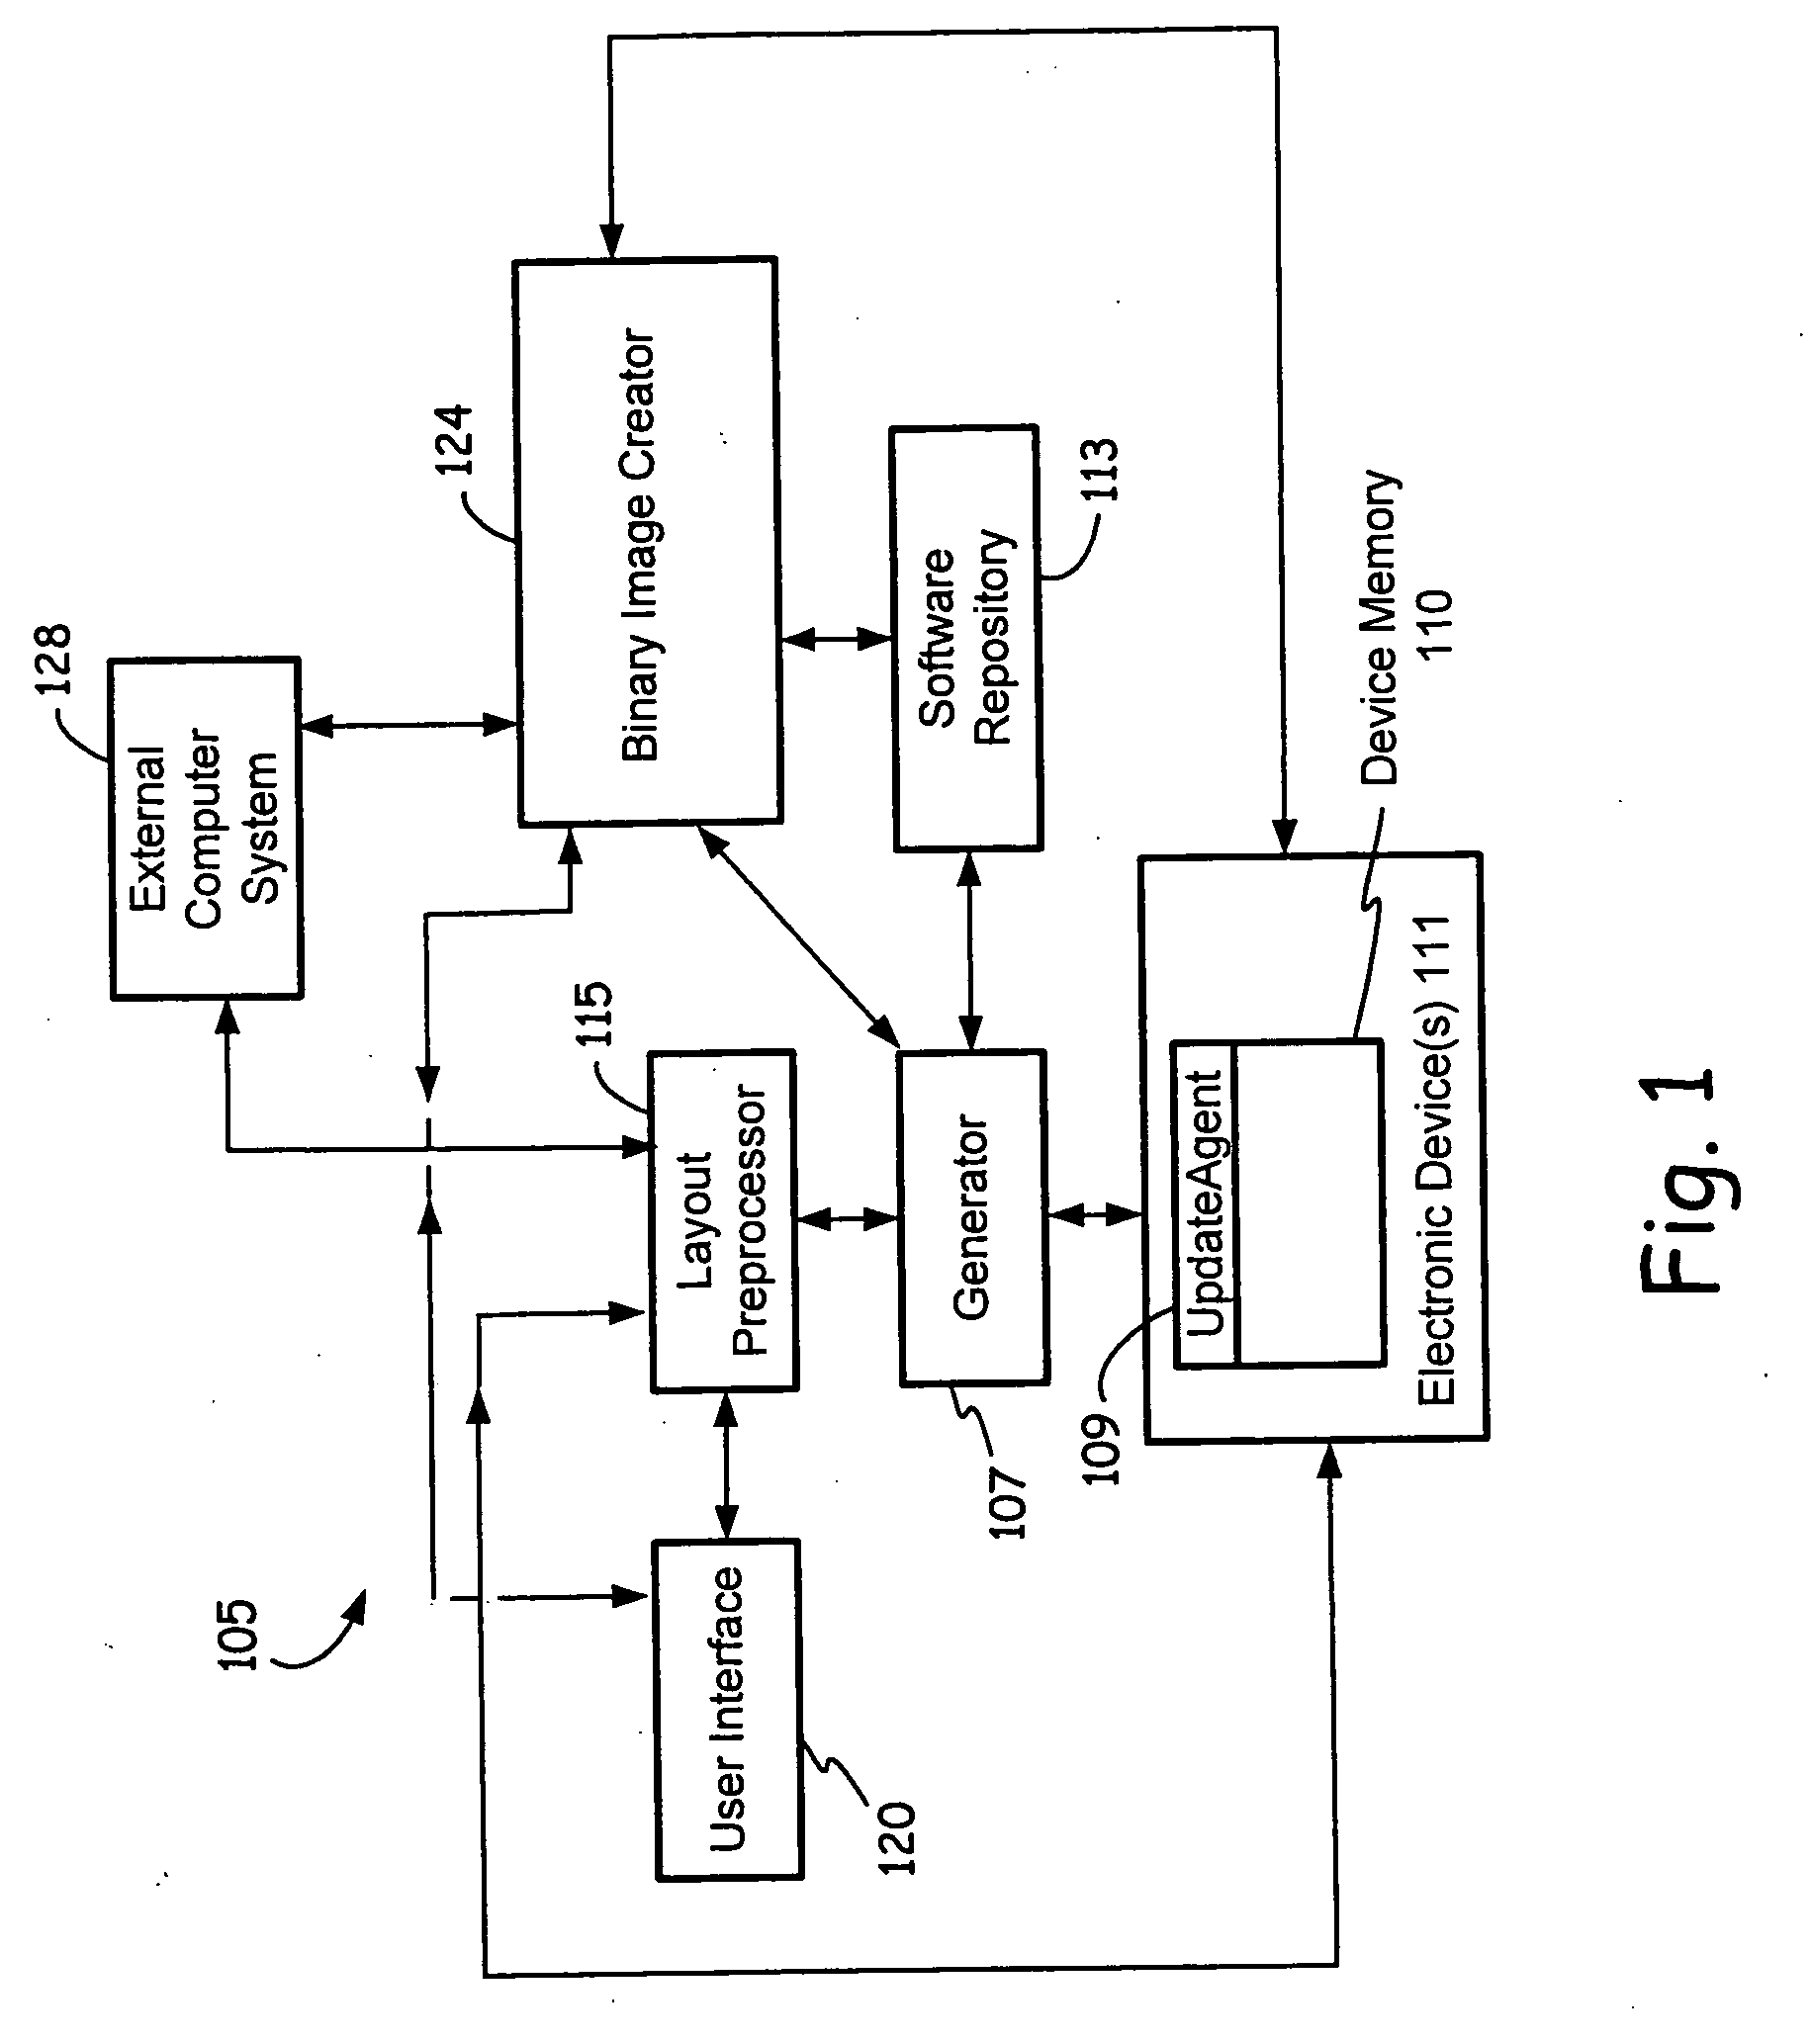 Initialization and update of software and/or firmware in electronic devices